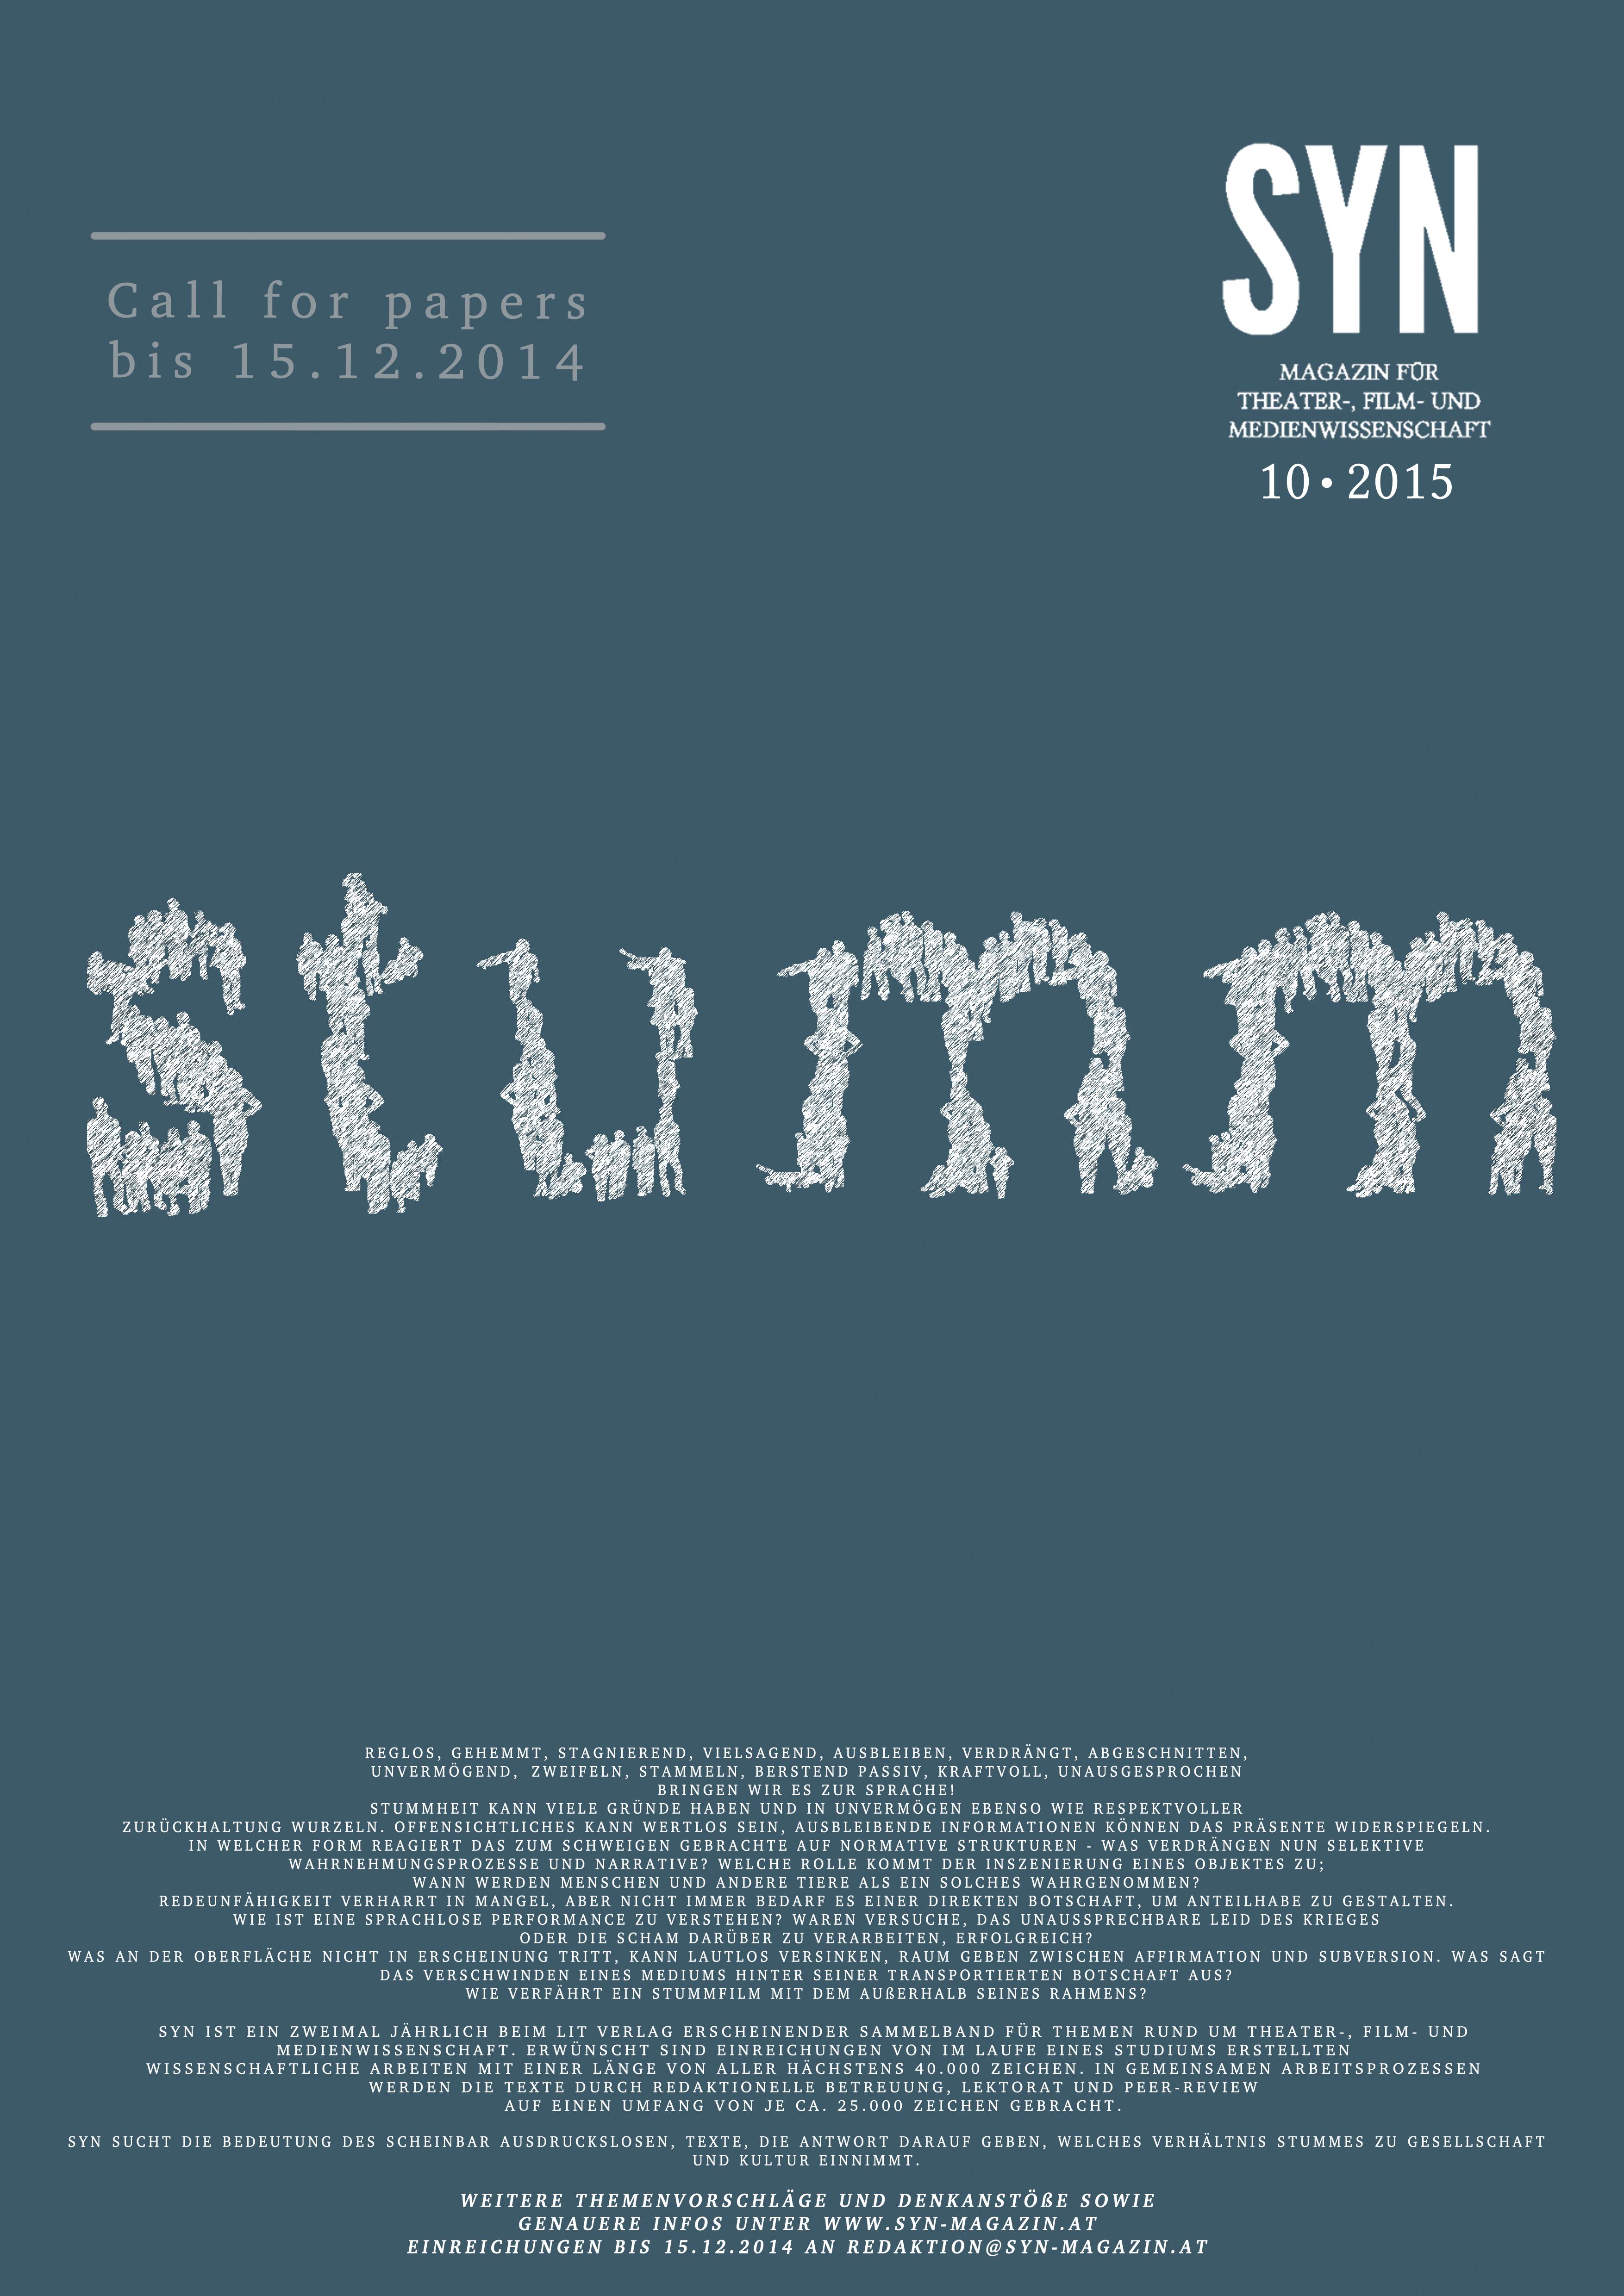 Call for Papers: SYN „stumm“, bis 15. Dezember